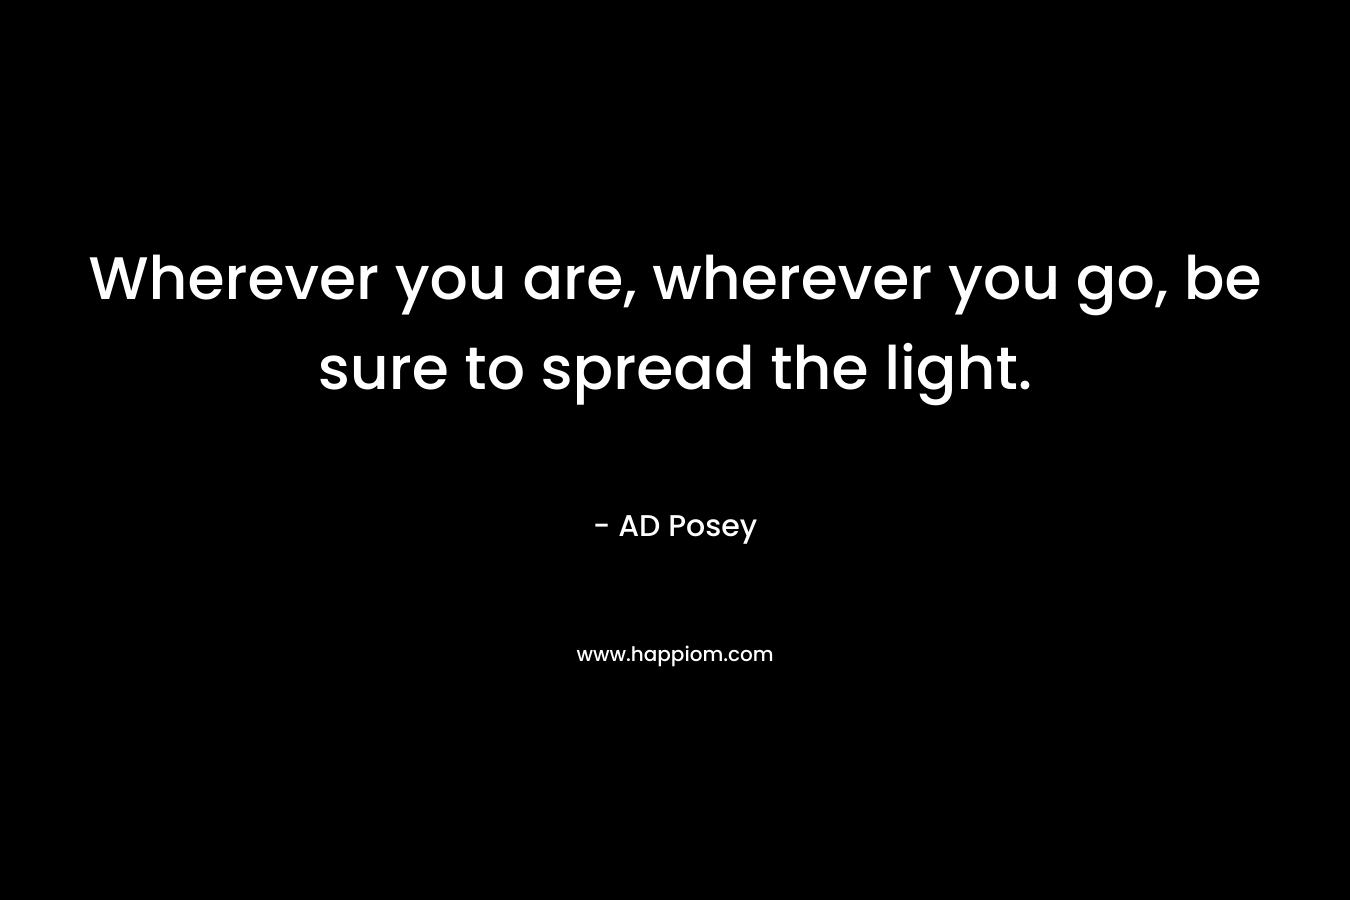 Wherever you are, wherever you go, be sure to spread the light.